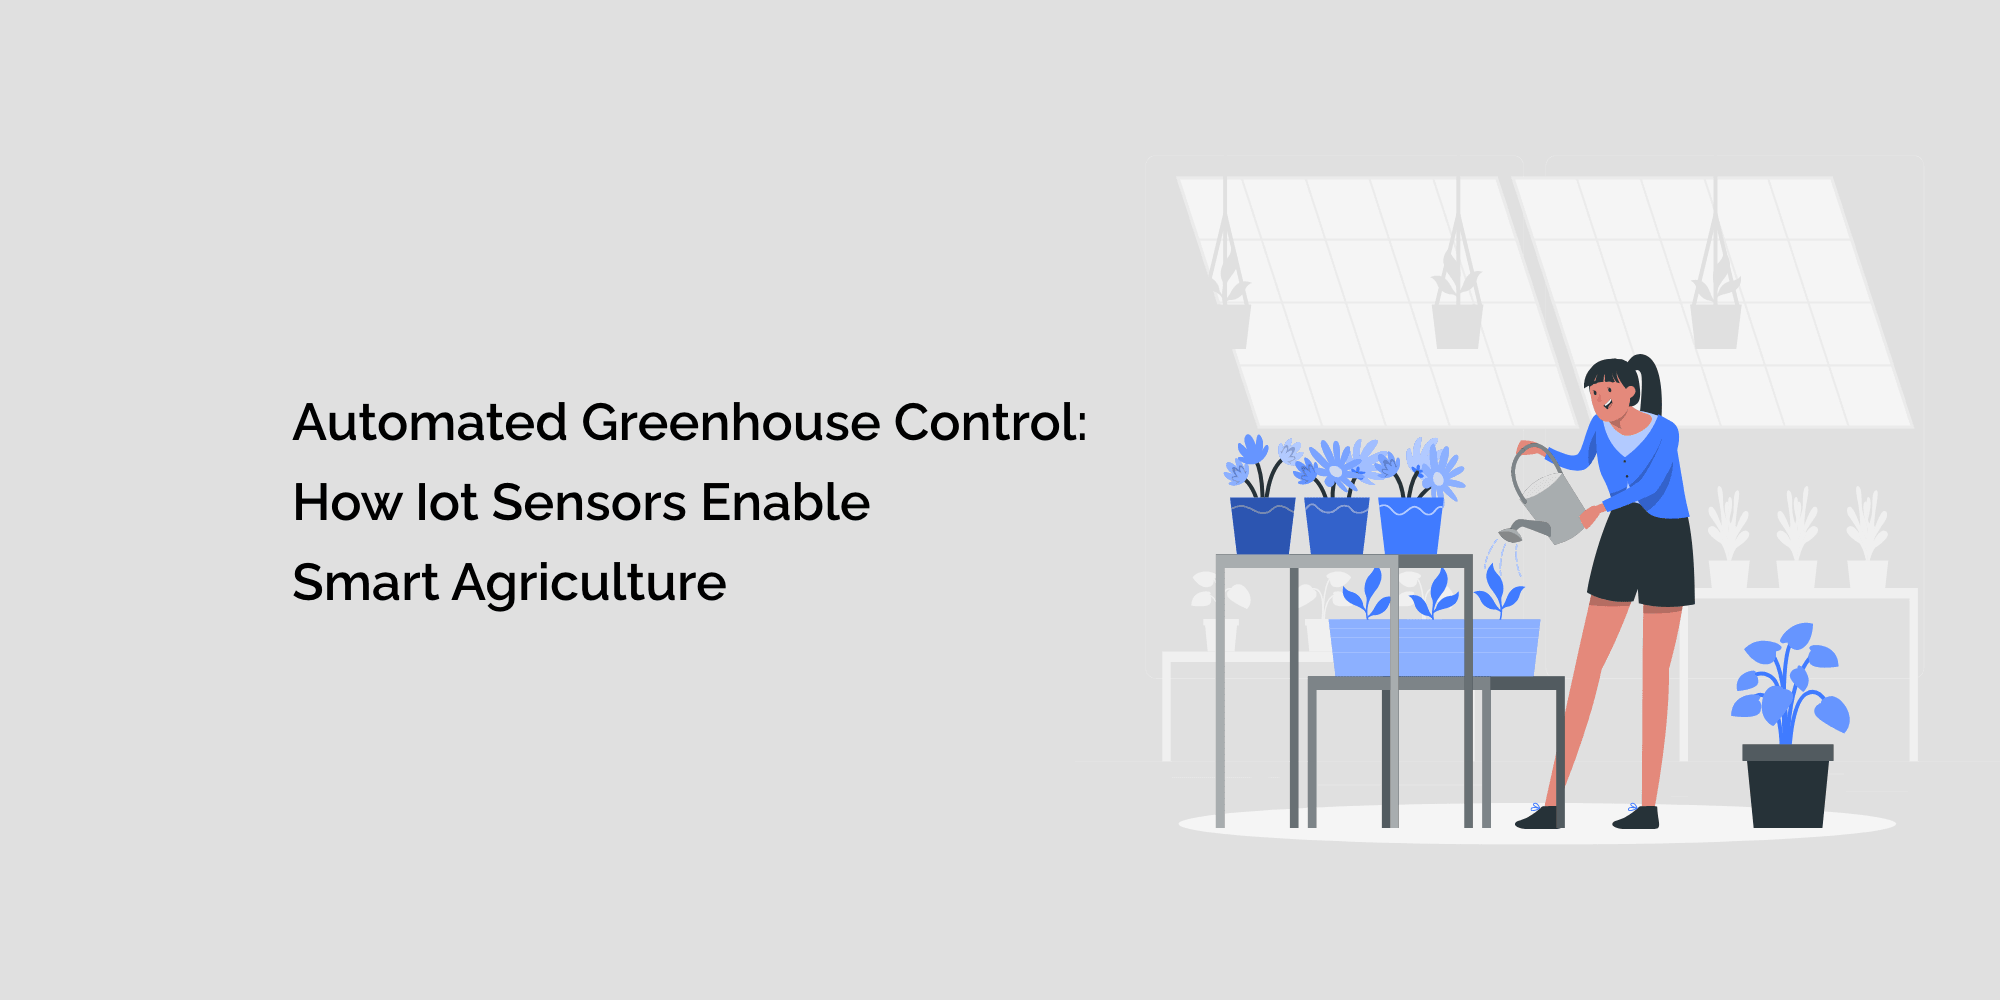 Automated Greenhouse Control: How IoT Sensors Enable Smart Agriculture